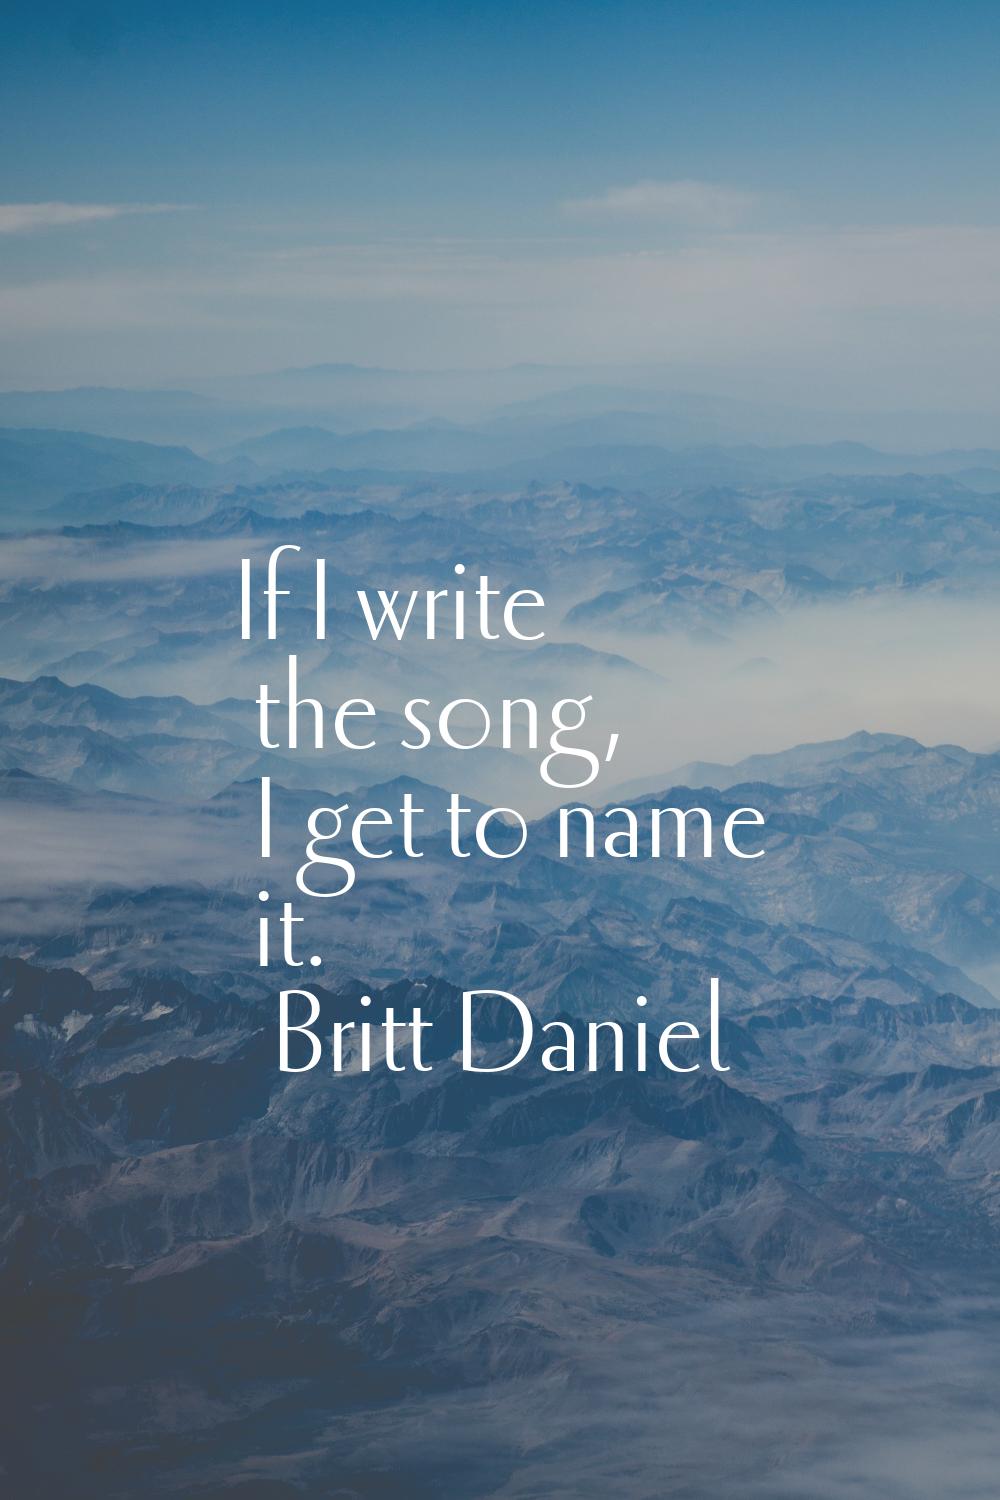 If I write the song, I get to name it.